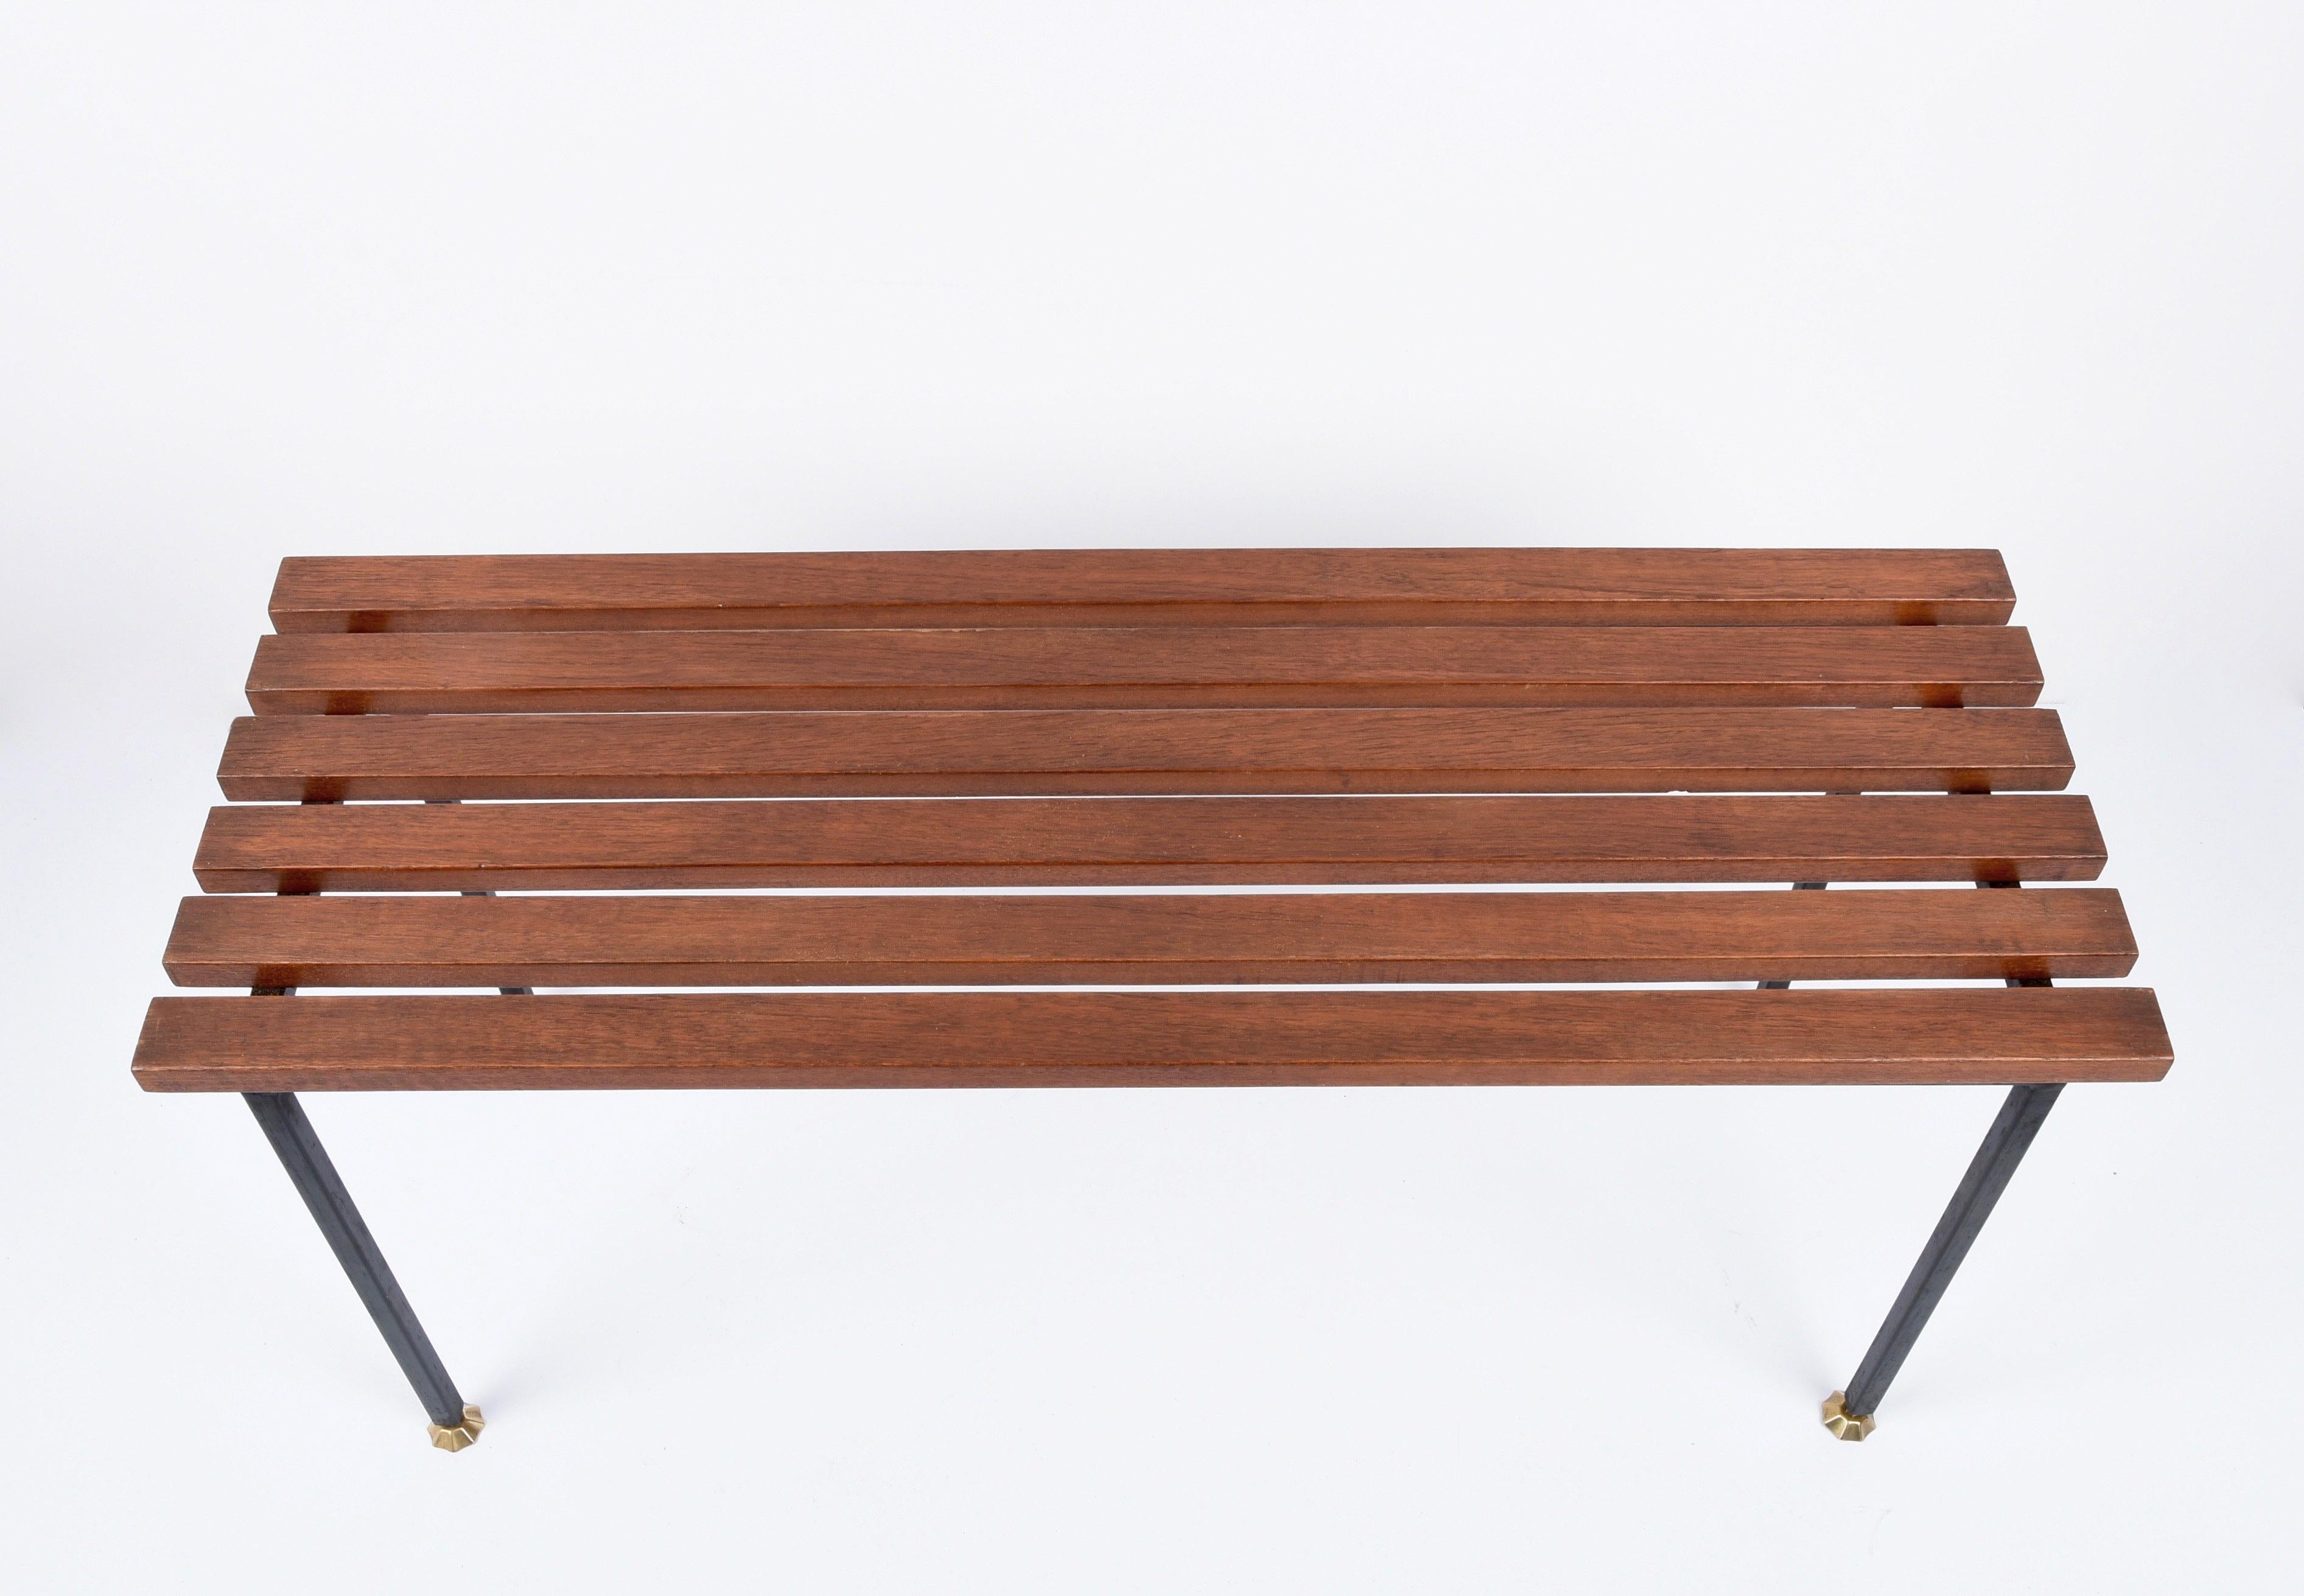 Midcentury Teak and Black Enameled Metal Italian Bench with Brass Feet, 1960s For Sale 1